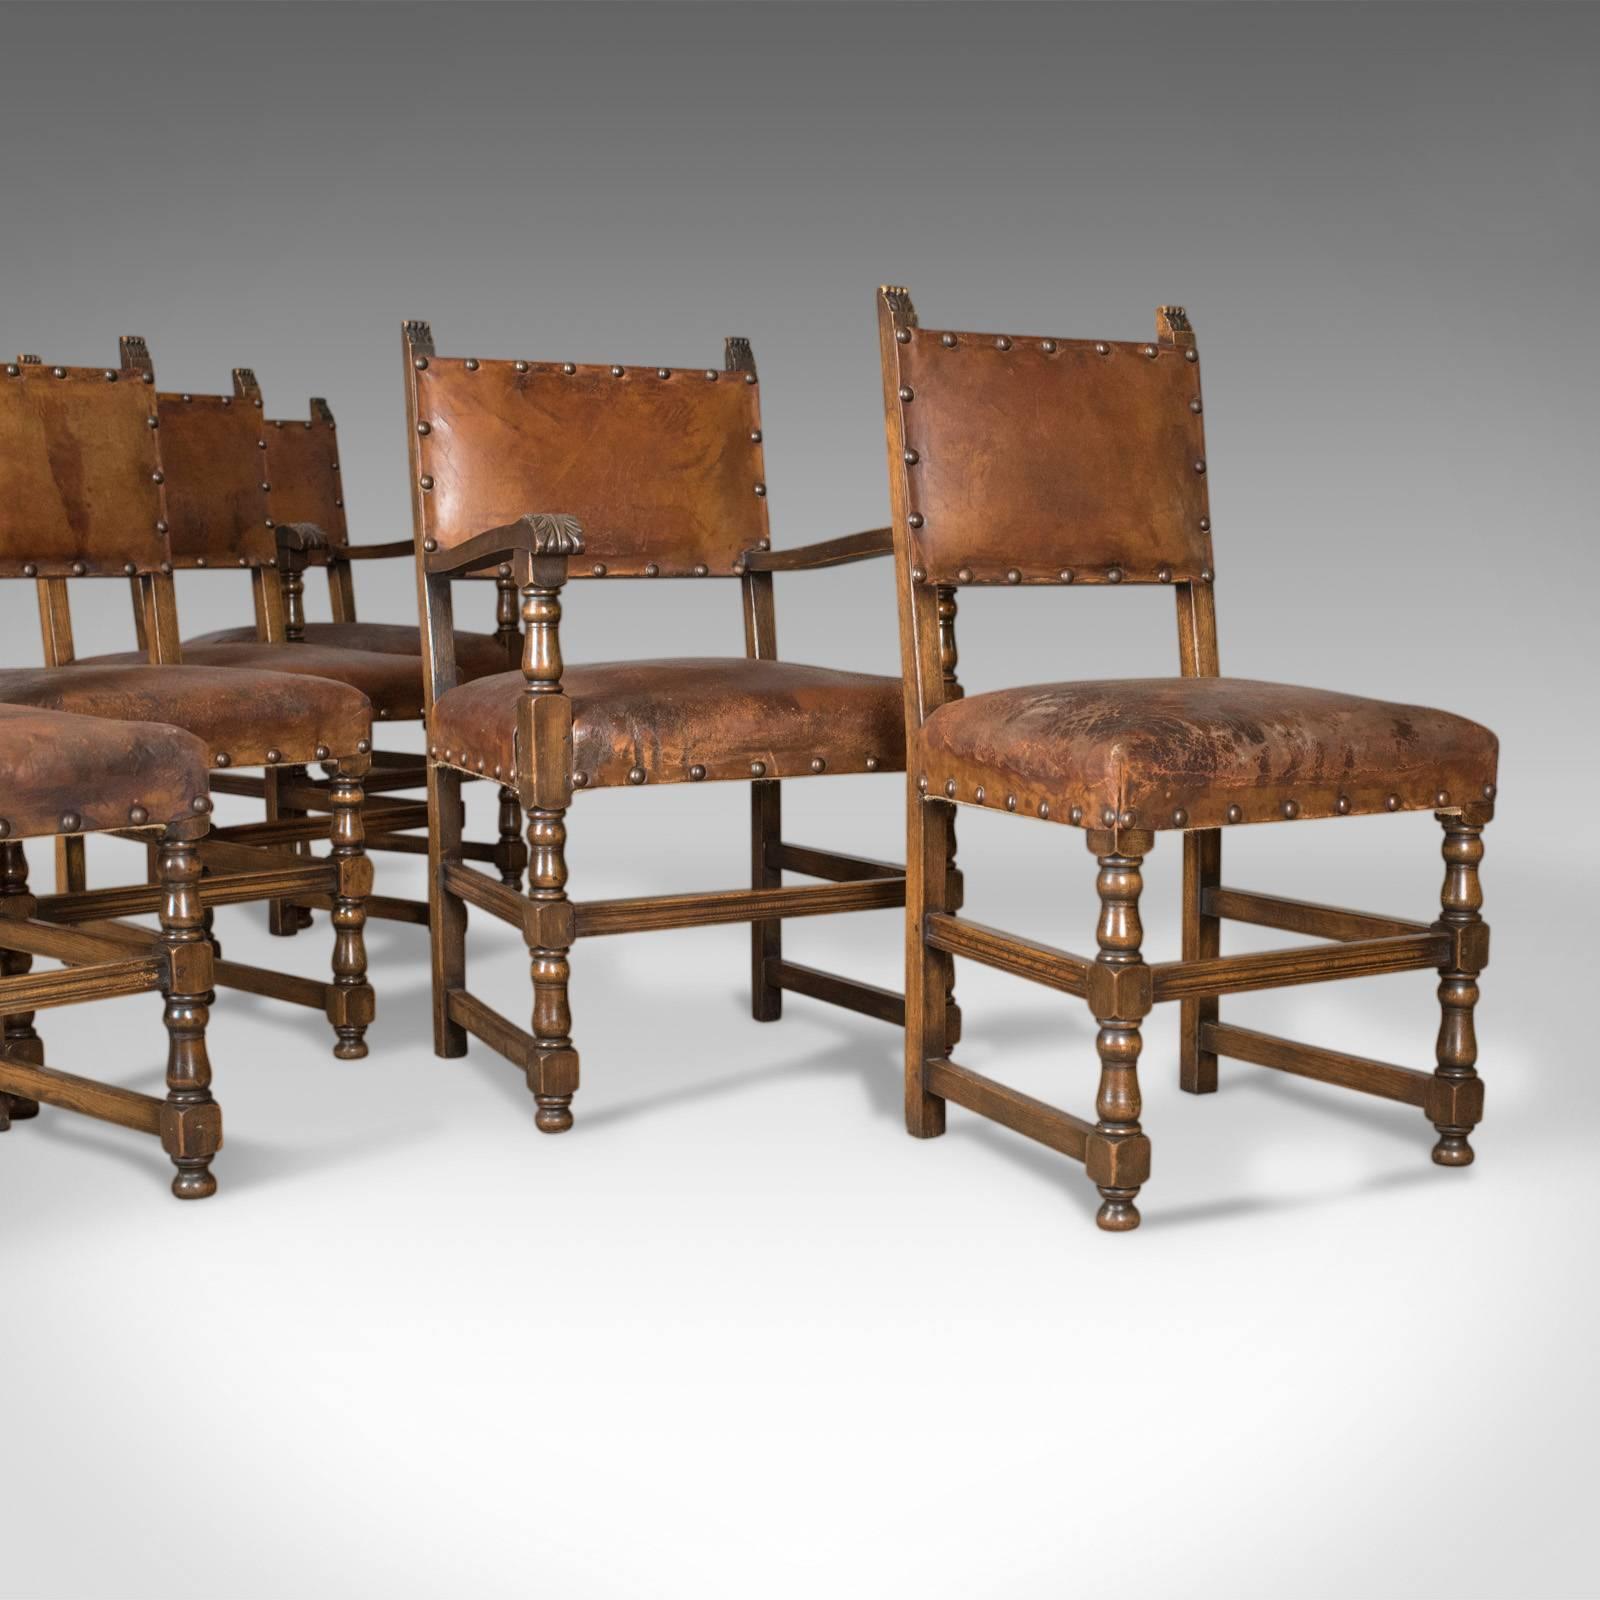 This is a set of six antique dining chairs, Edwardian in the 17th century taste, in English oak and leather.

A pair of carvers plus four side chairs
Sturdy English oak frames with three-quarter stretchers
Displaying good color throughout in a